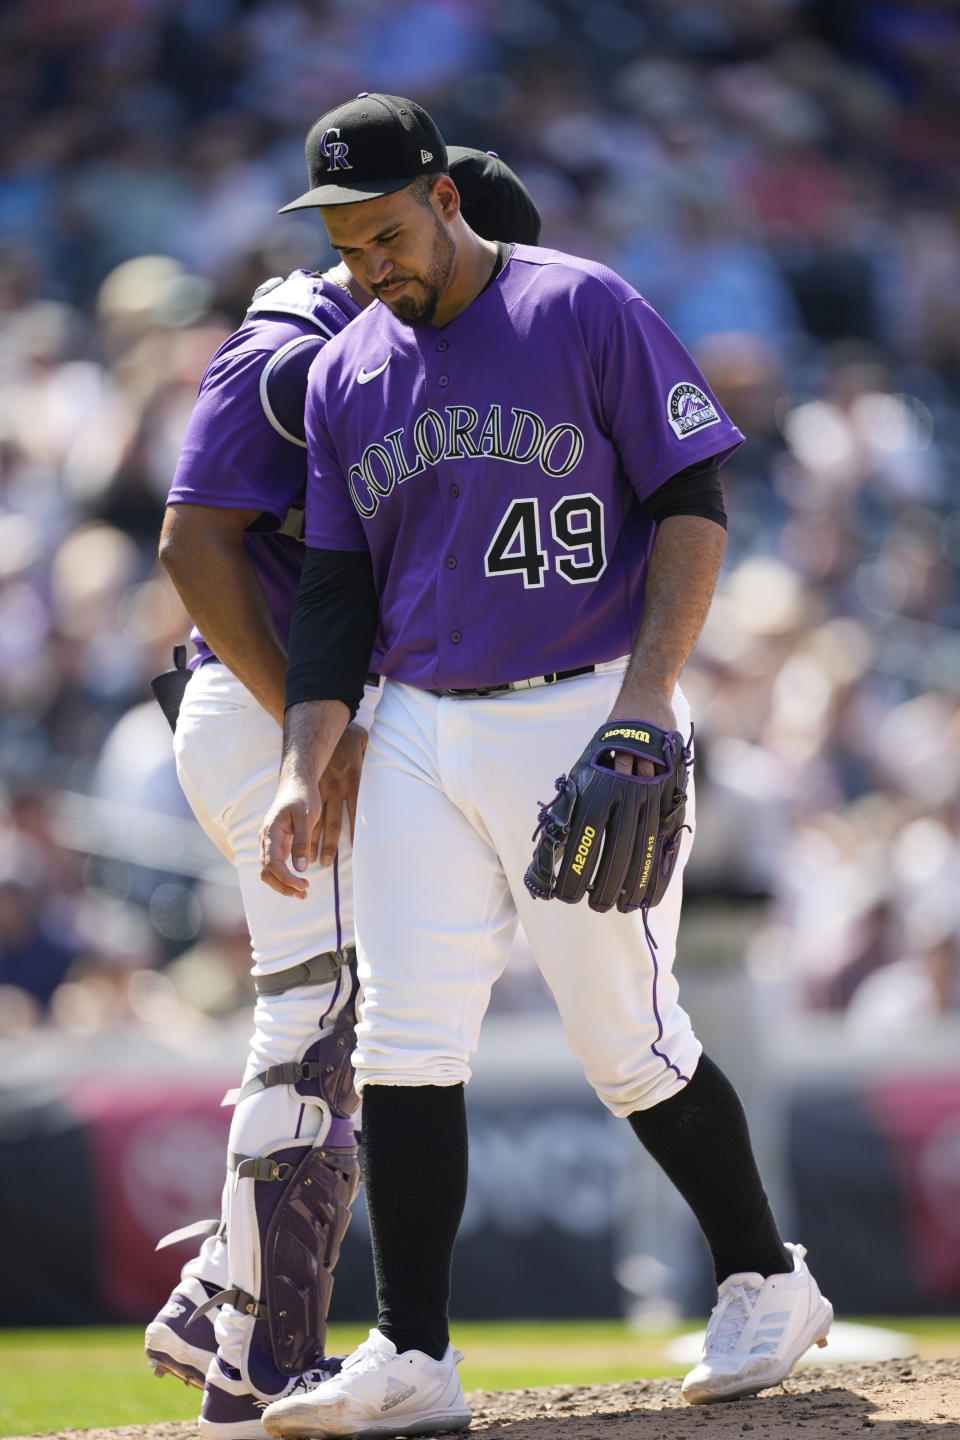 Colorado Rockies starting pitcher Antonio Senzatela heads to the dugout after taking a single off the right leg off the bat of Chicago White Sox's Leury Garcia in the seventh inning of a baseball game Wednesday, July 27, 2022, in Denver. (AP Photo/David Zalubowski)